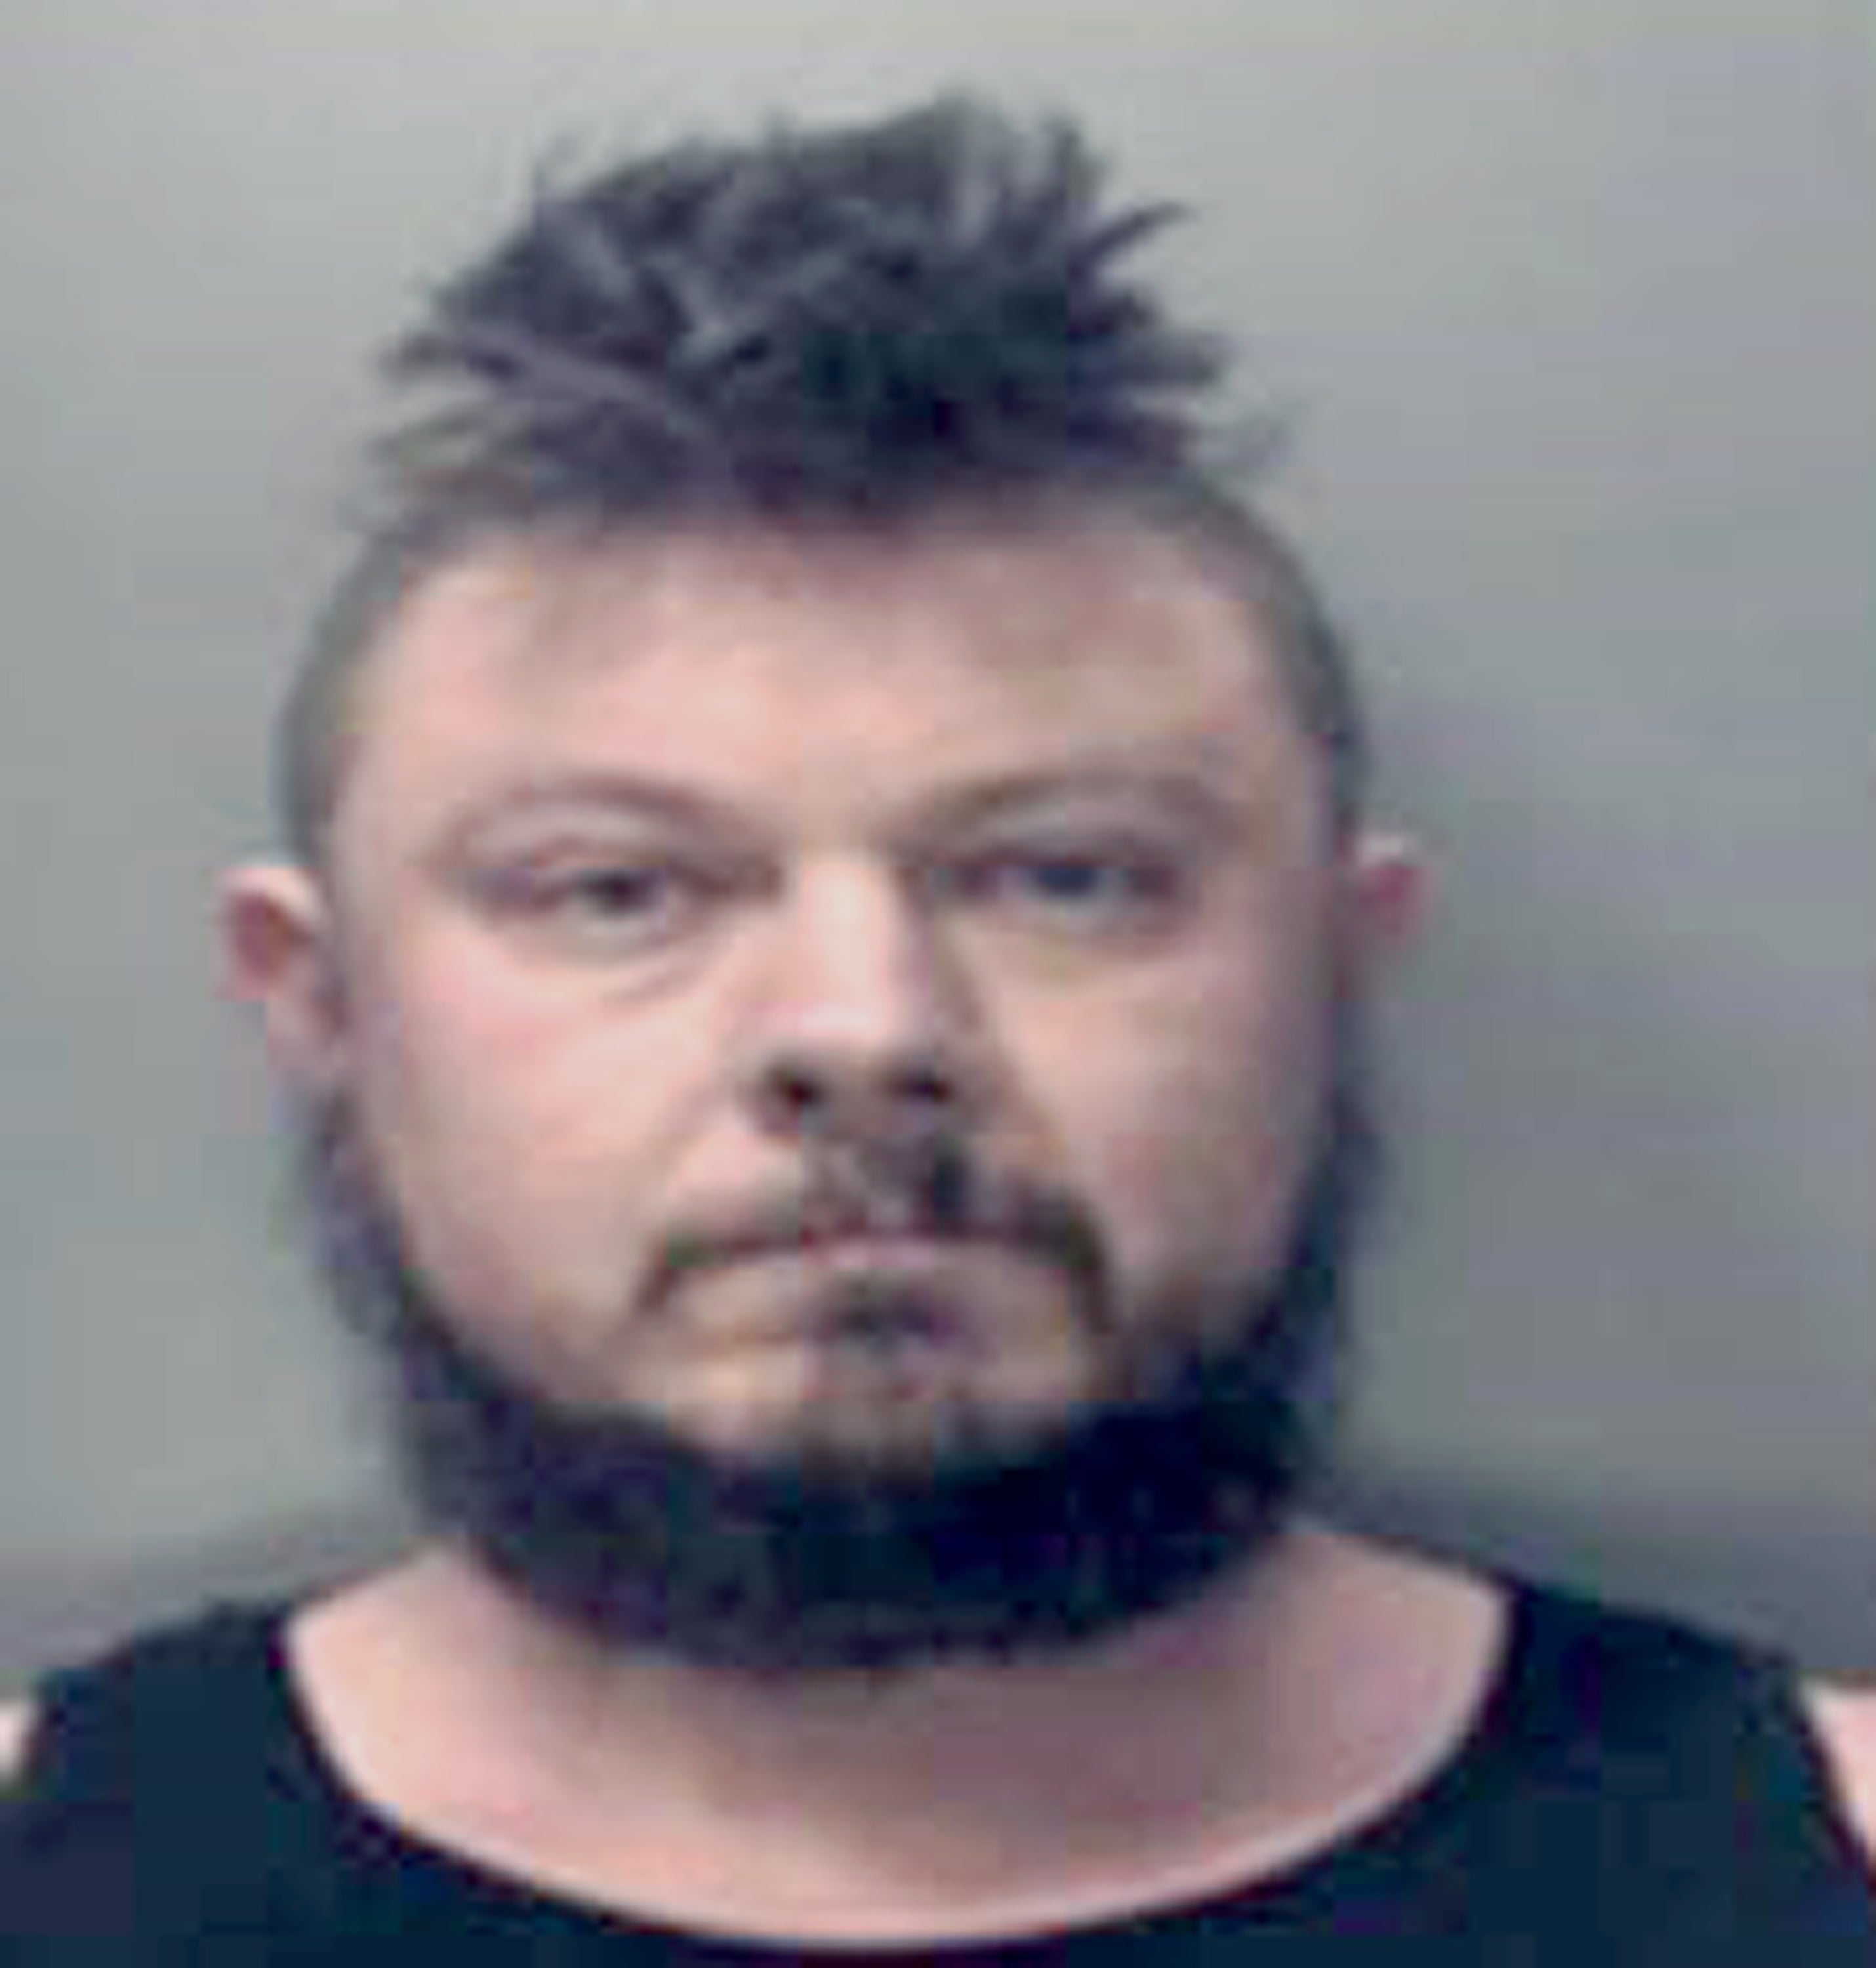 Janus Atkin, 38, of Newport, Gwent, who had been completing a veterinary course, was jailed for 12 years